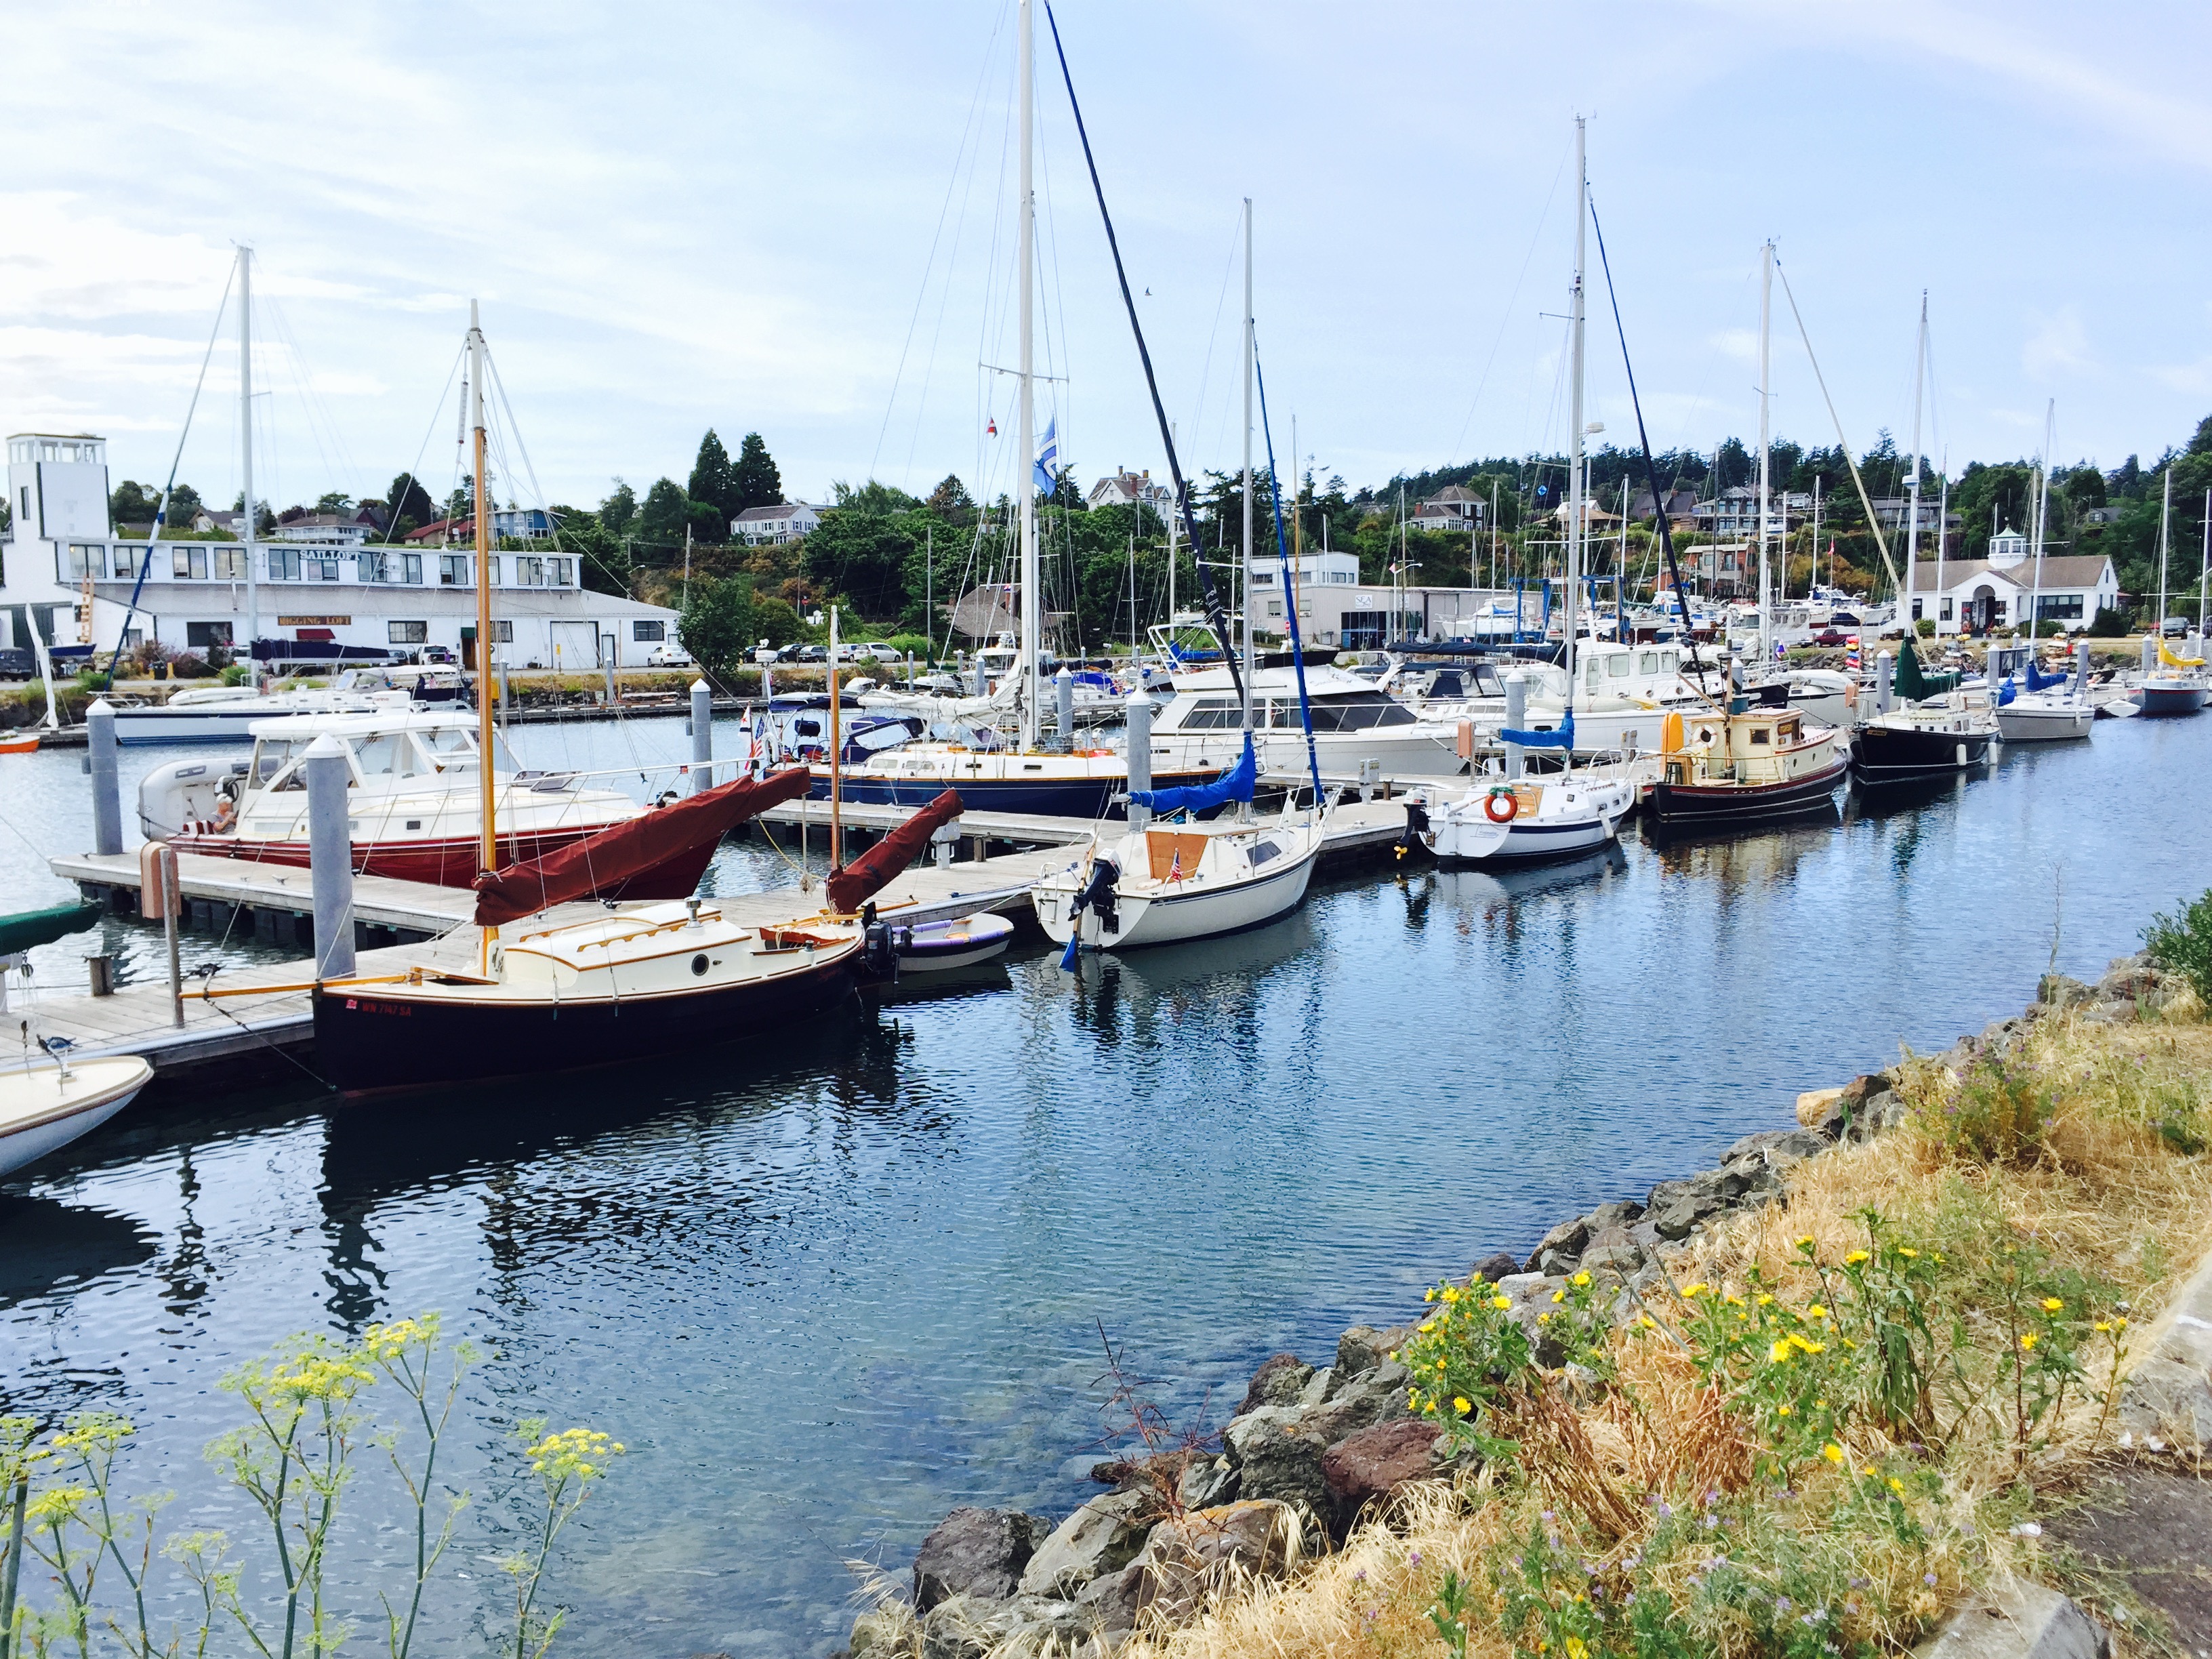 Some boats at port Townsend